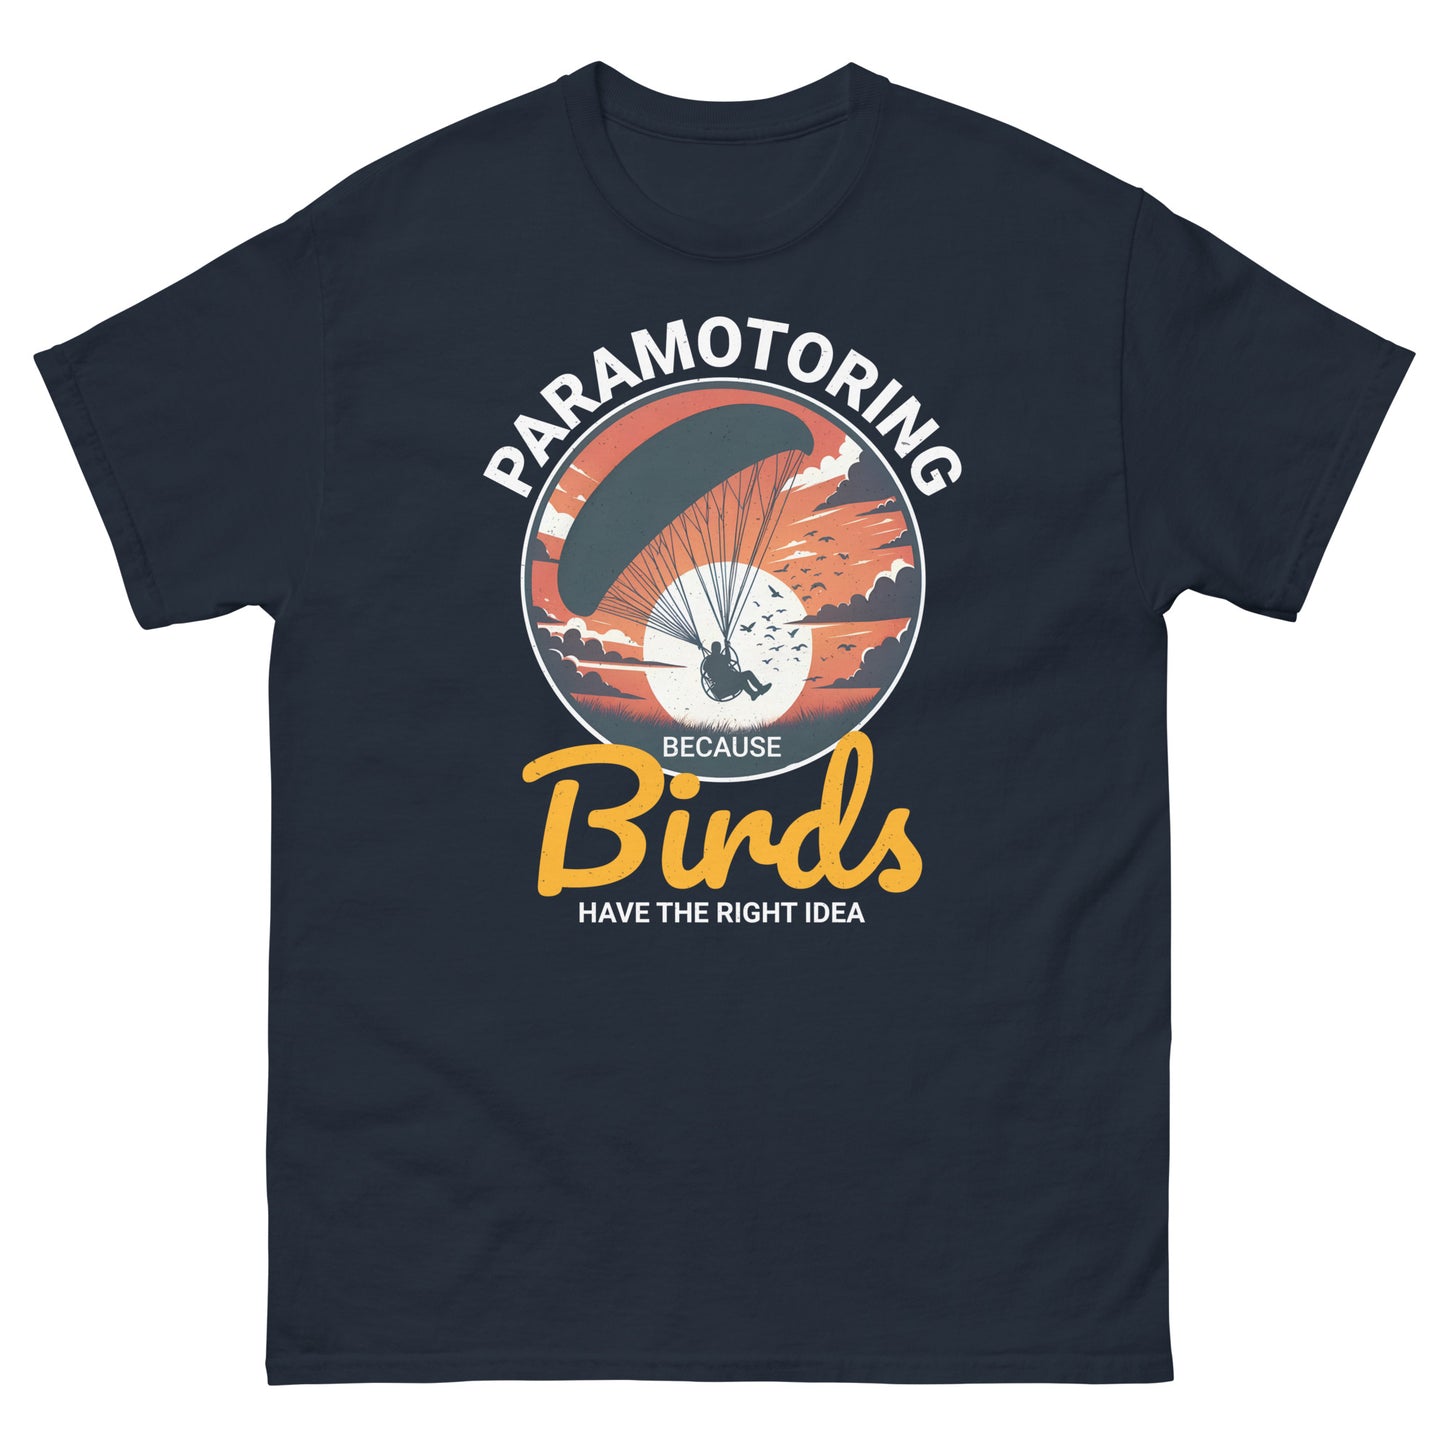 Paramotoring T-Shirt: Because Birds Have the Right Idea